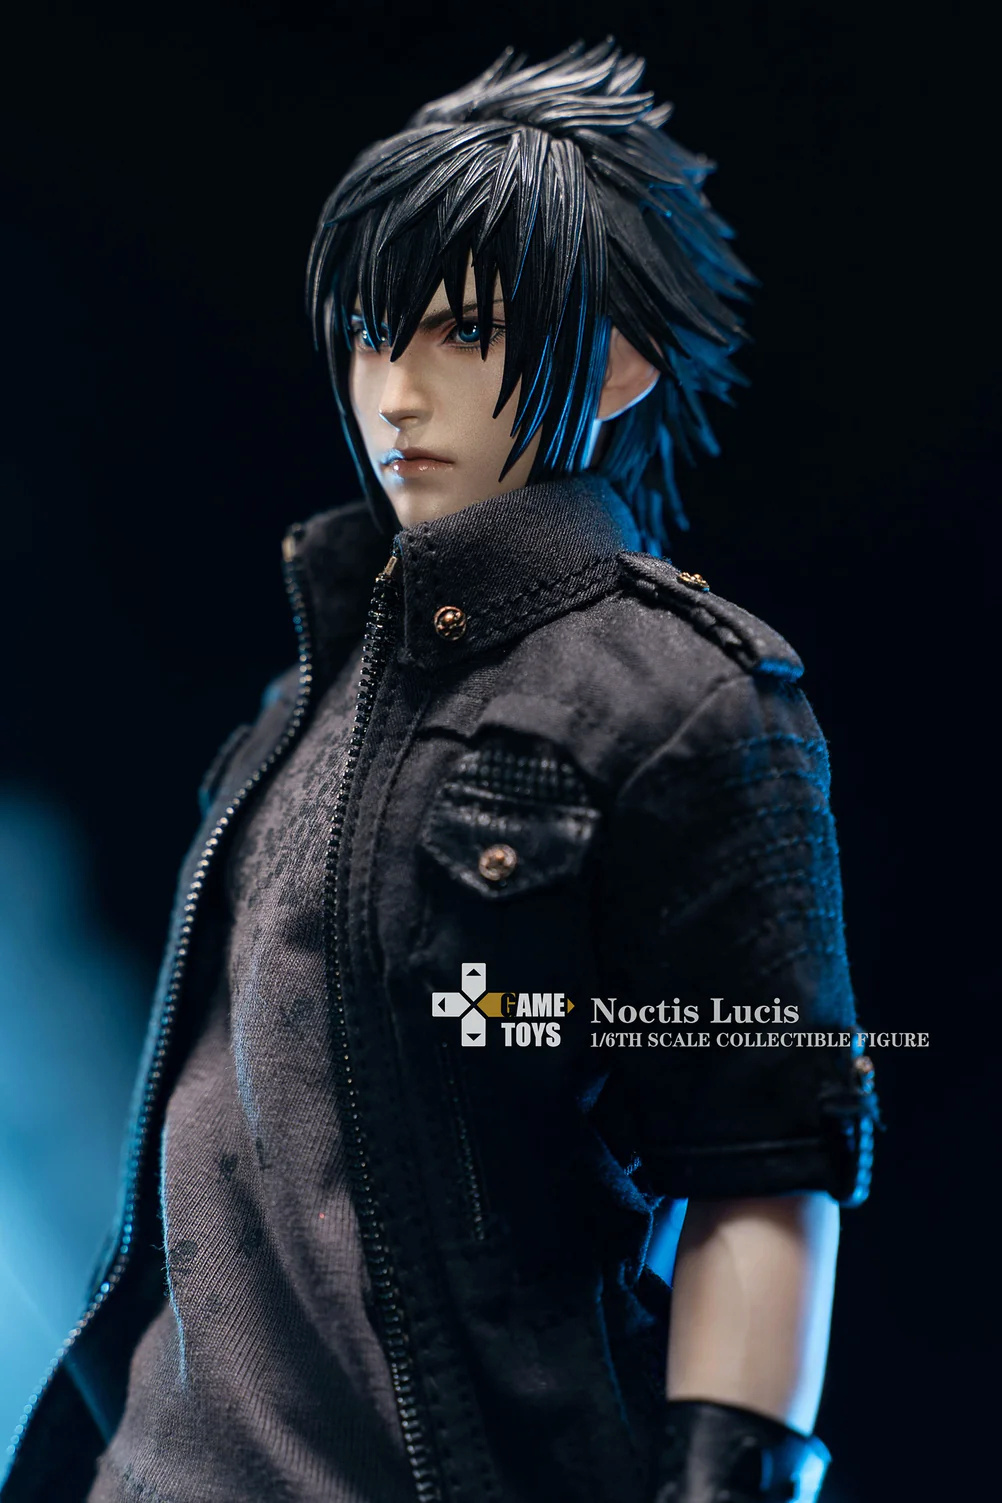 Gametoys - NEW PRODUCT: Gametoys Noctis Lucis, additional accessories, and throne 16_web10